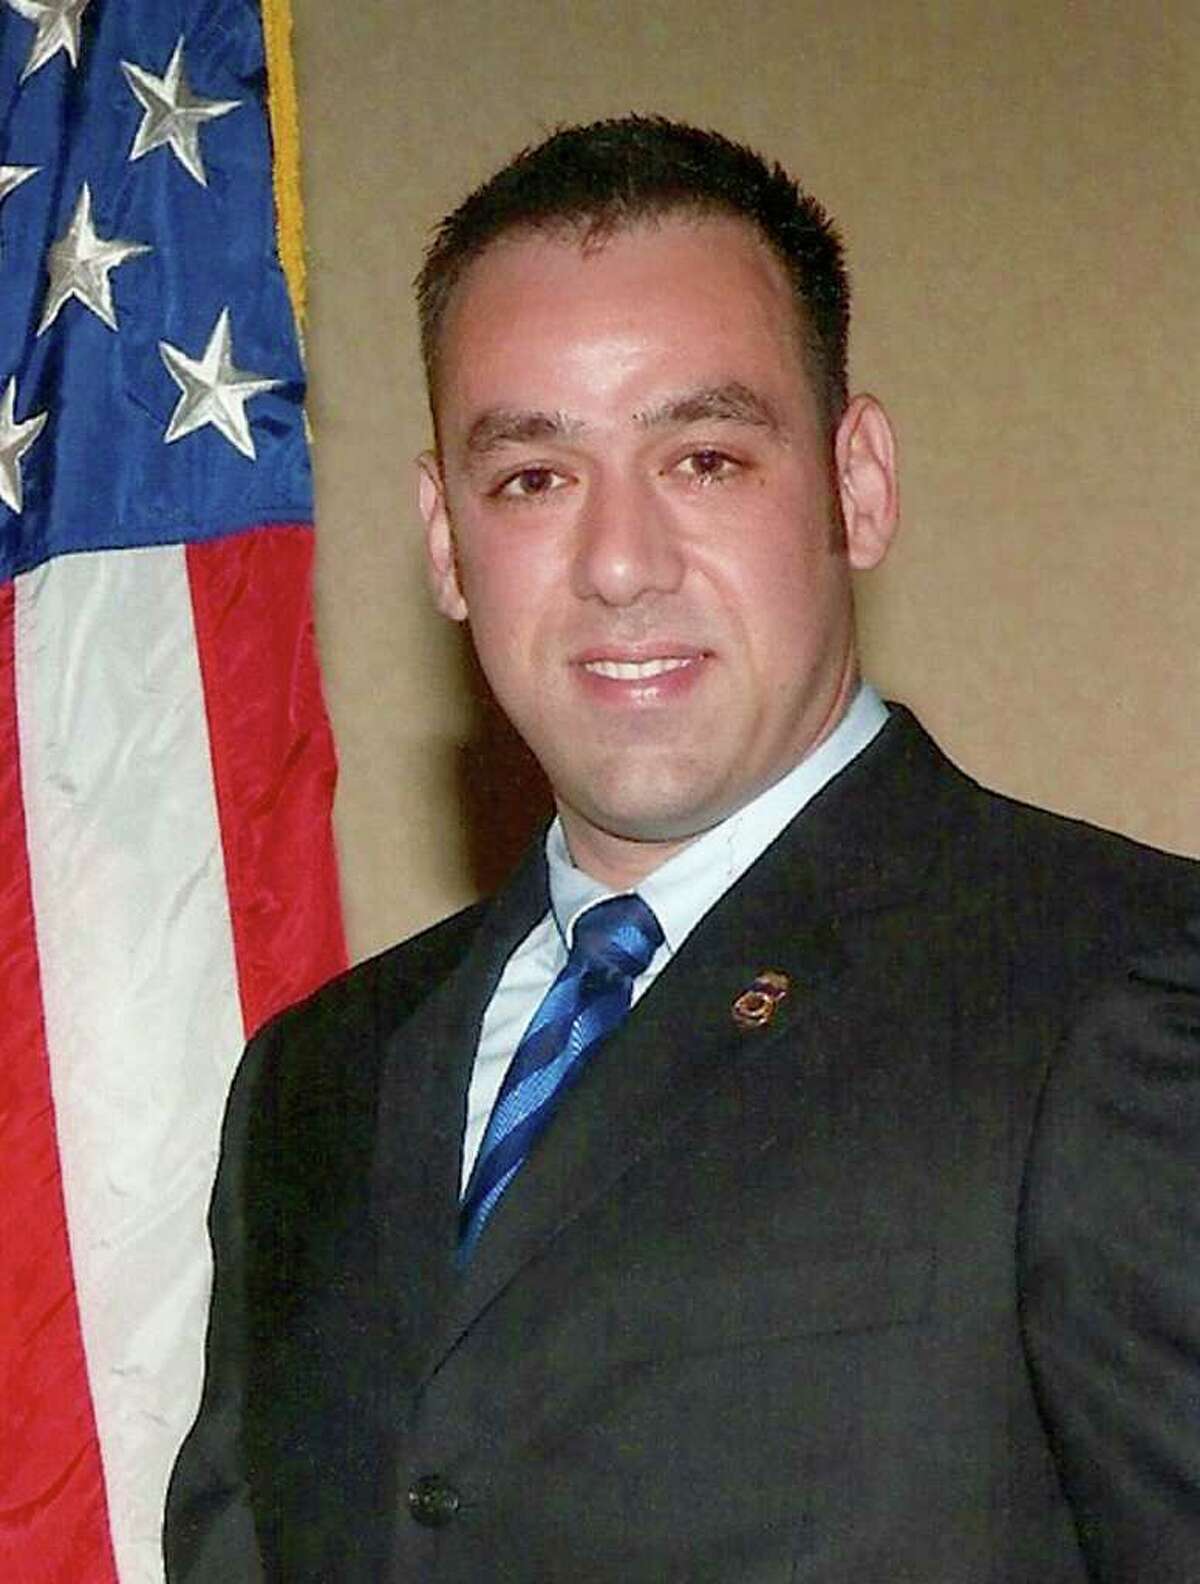 ICE Agent Jaime Zapata died in Mexico in 2011.